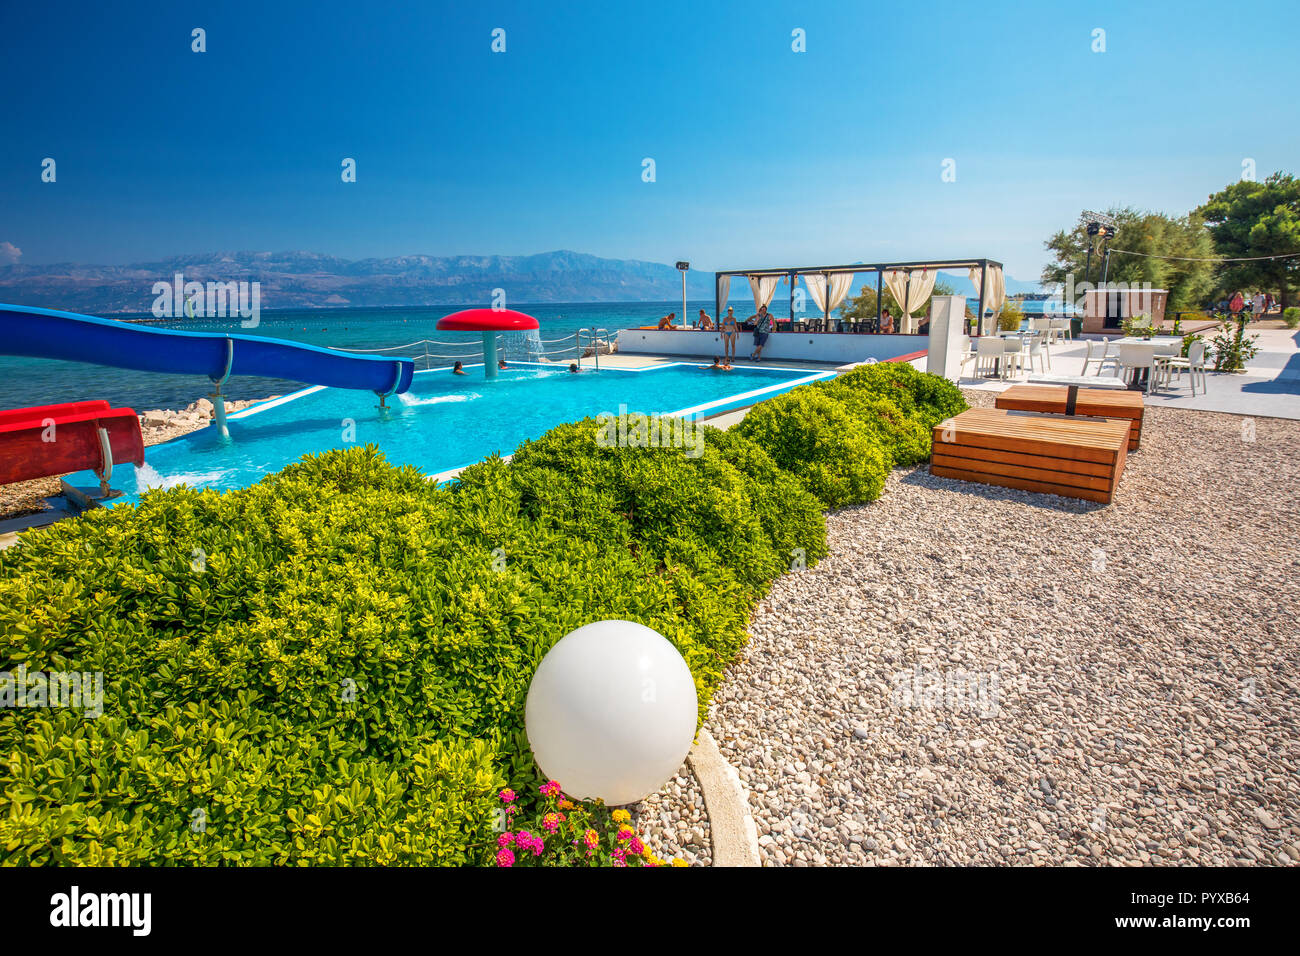 Pool with toboggan in holiday resort on Brac island with palm trees and turquoise clear ocean water, Supetar, Brac, Croatia Stock Photo